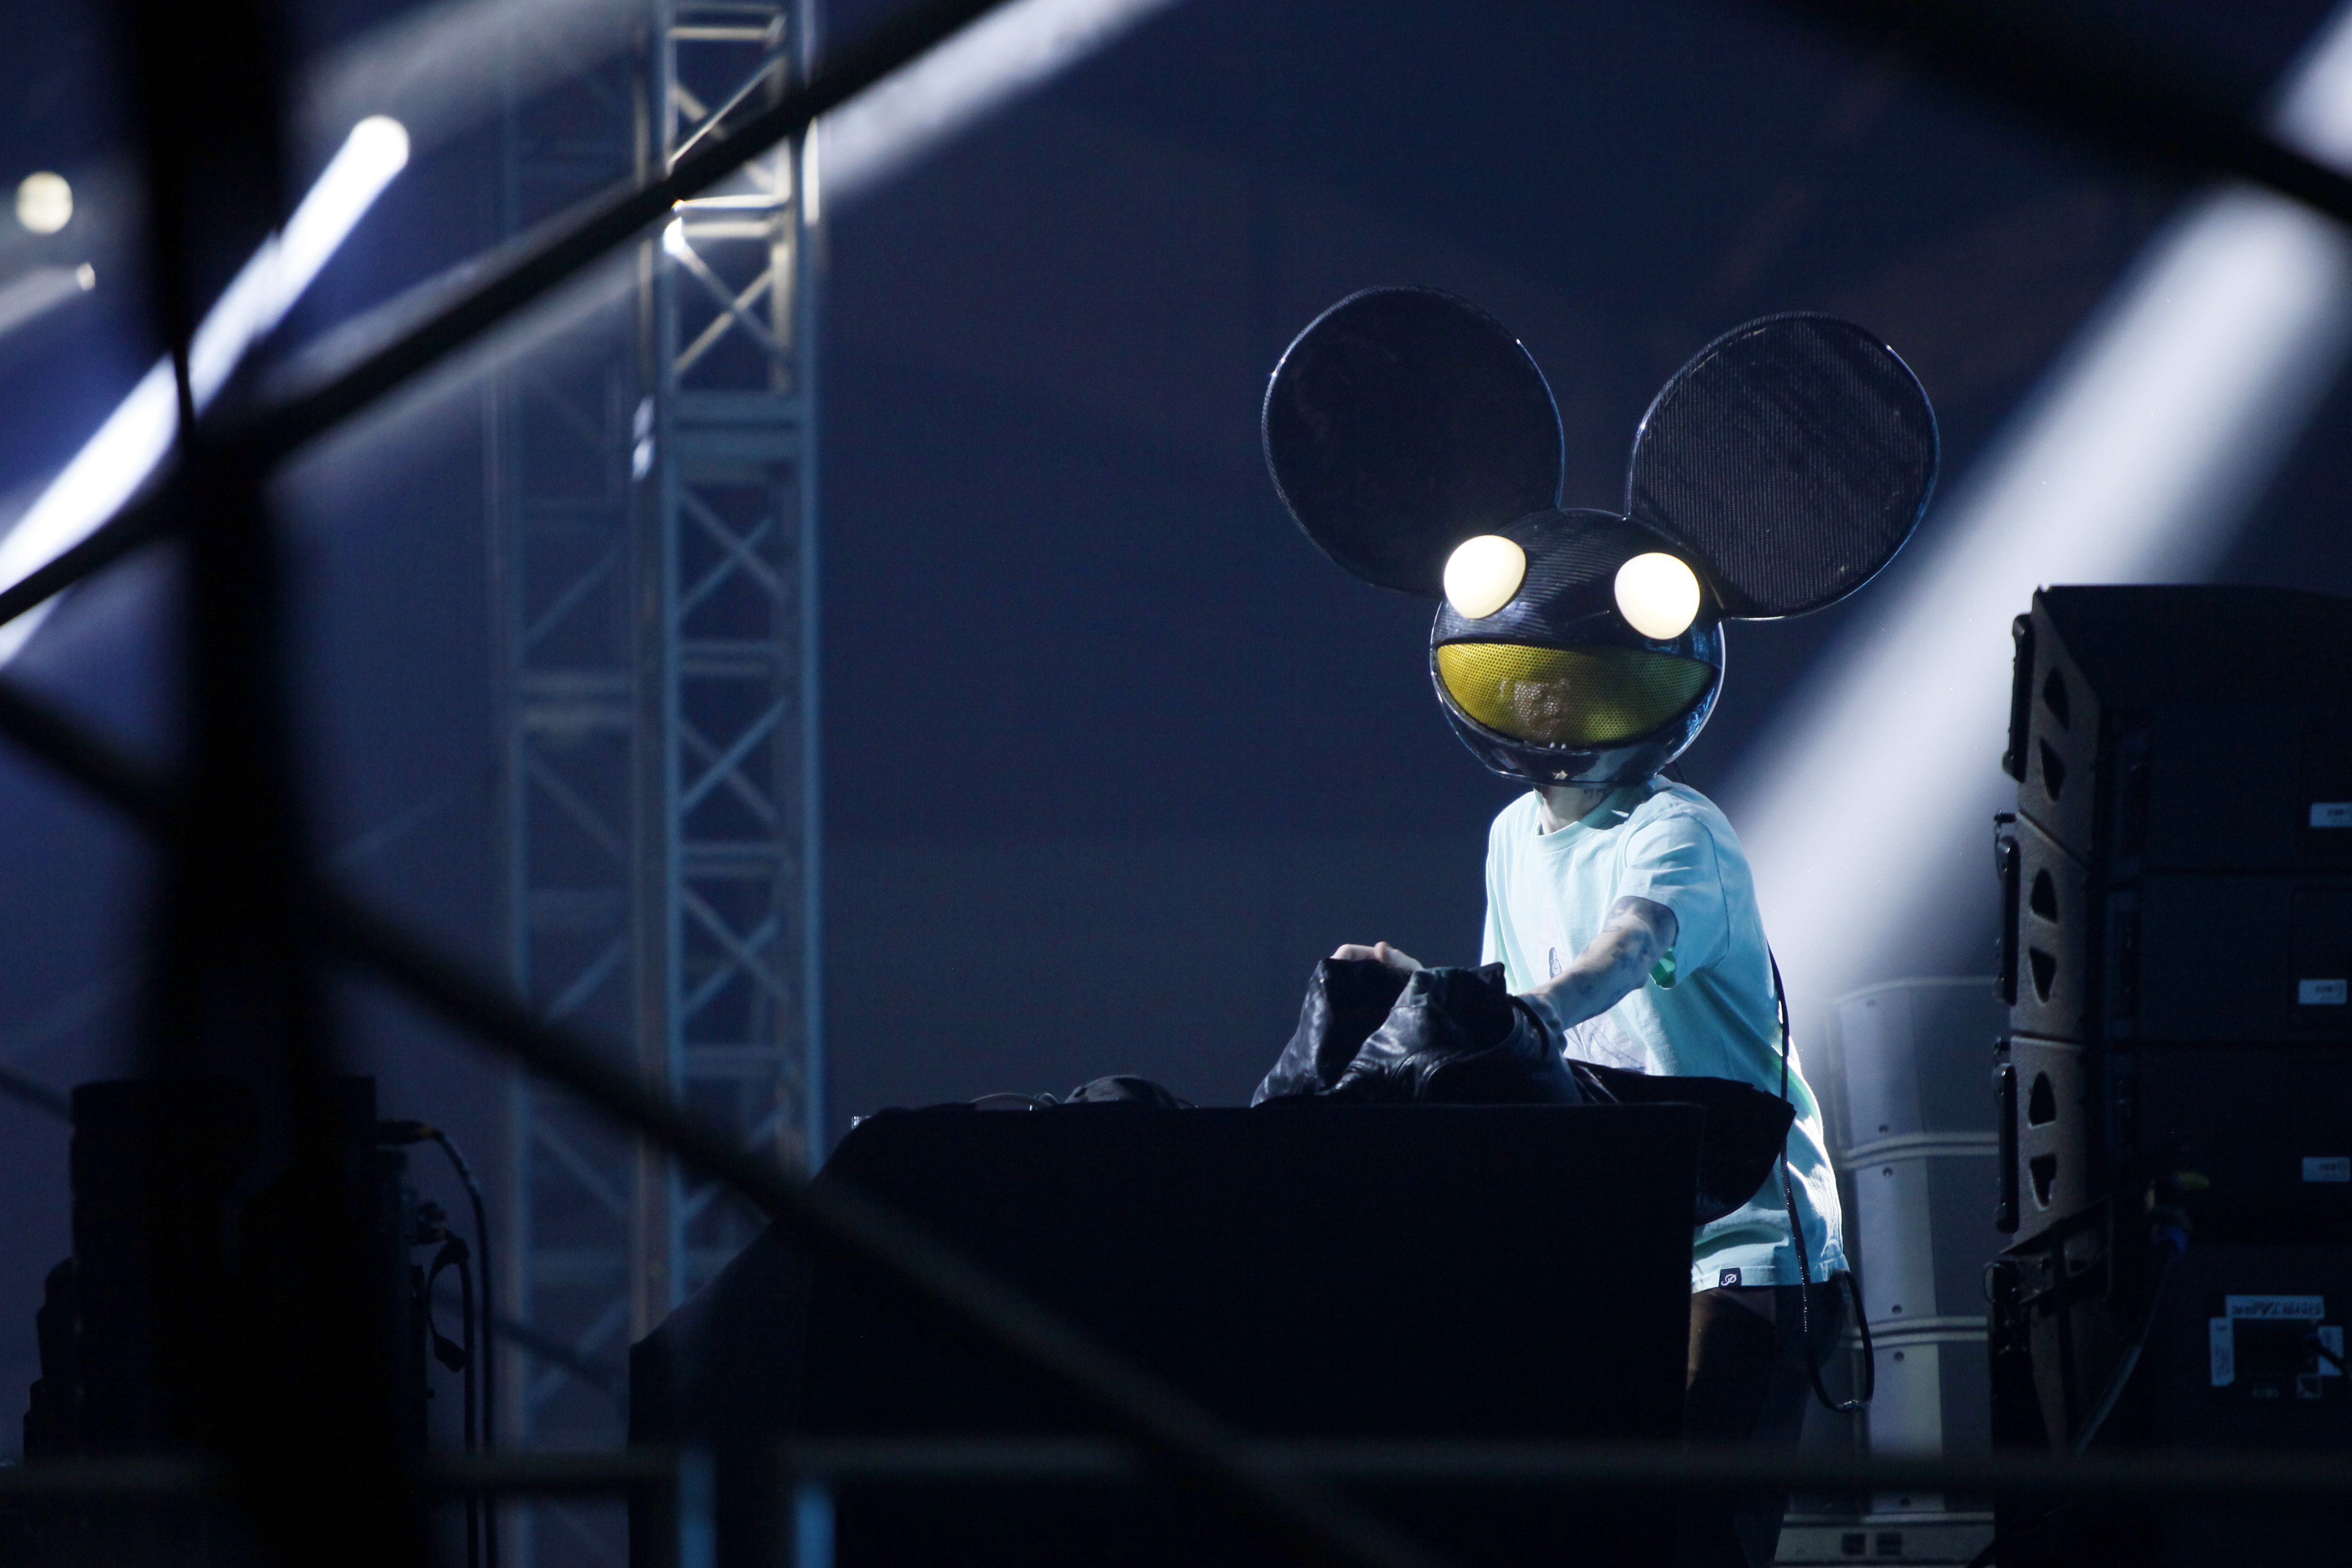 Texas Motor Speedway to host deadmau5 for drive-in show